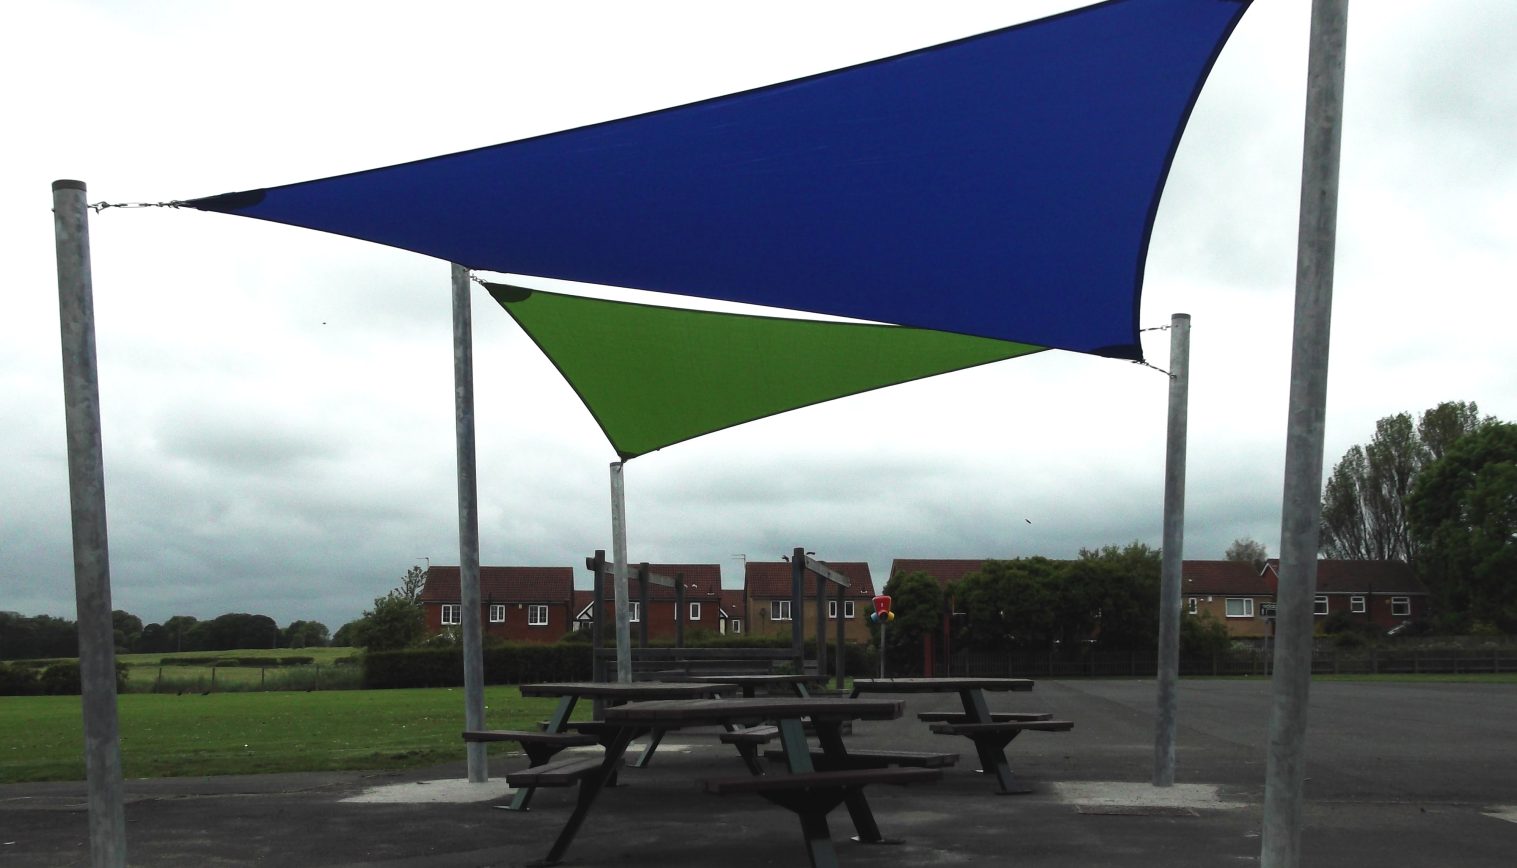 Bothal Middle School – Second Shade Sail Array